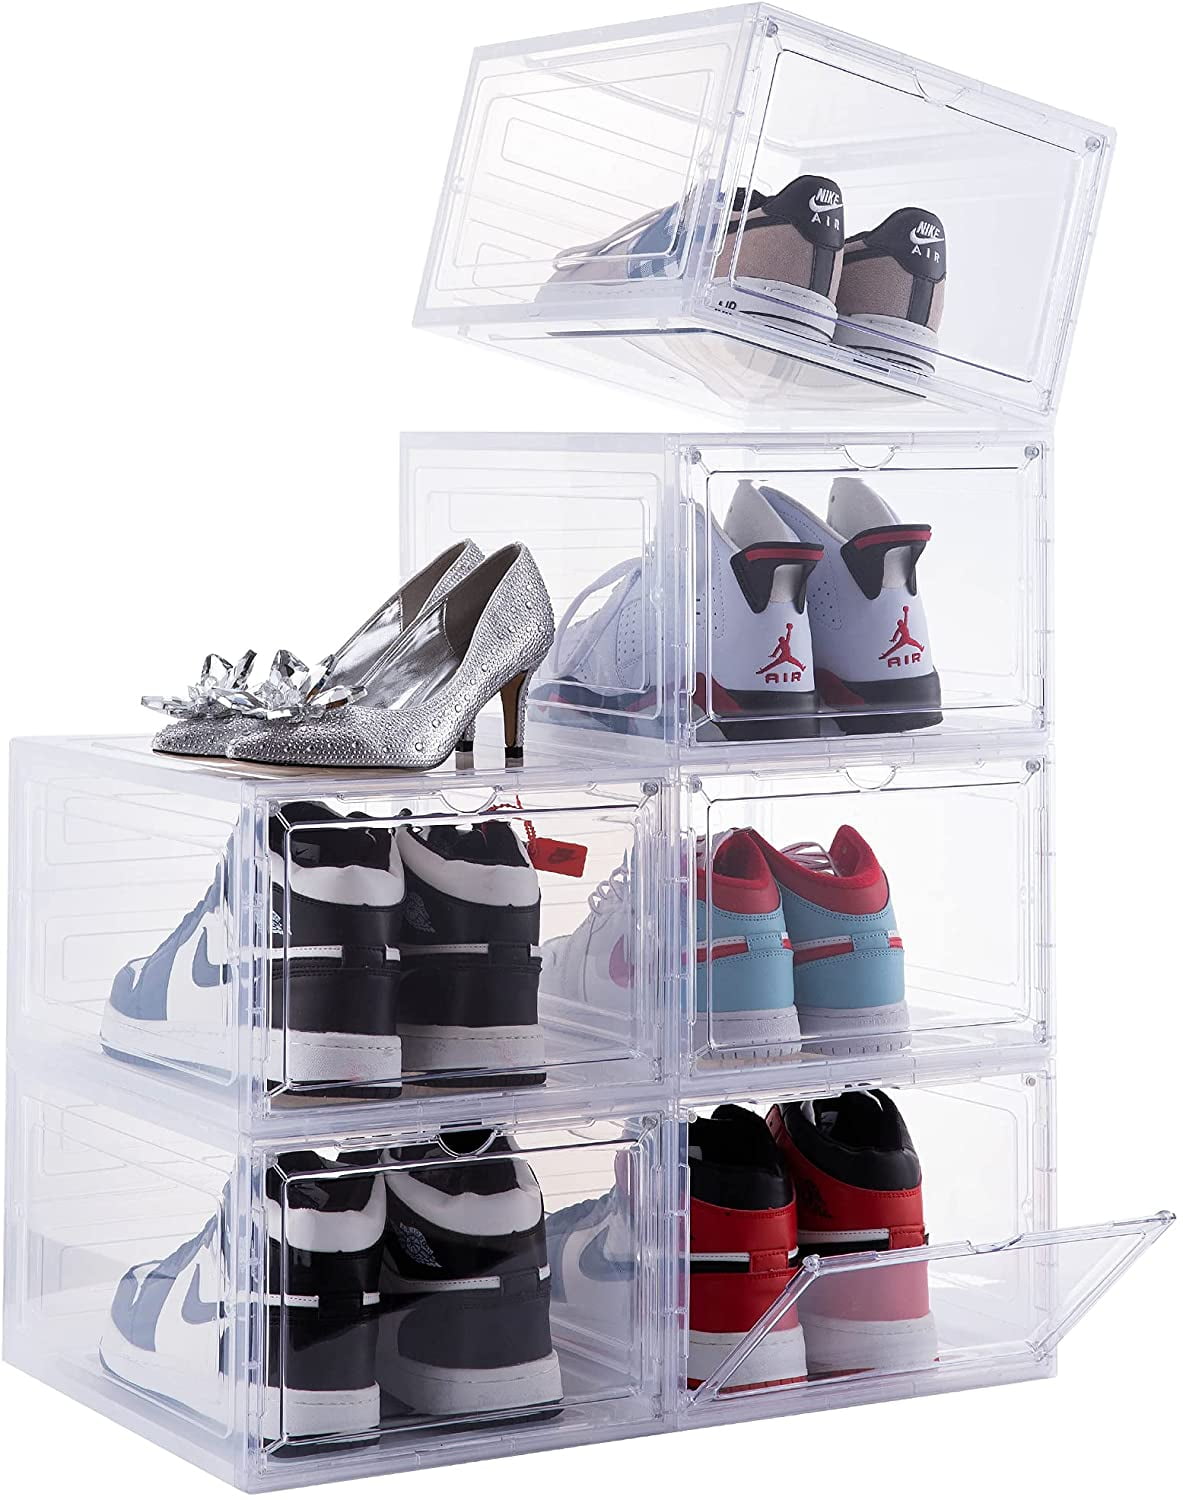 6 x CLEAR PLASTIC MENS SHOE BOX STORAGE STACKING STACKABLE UNIT DRAWER 